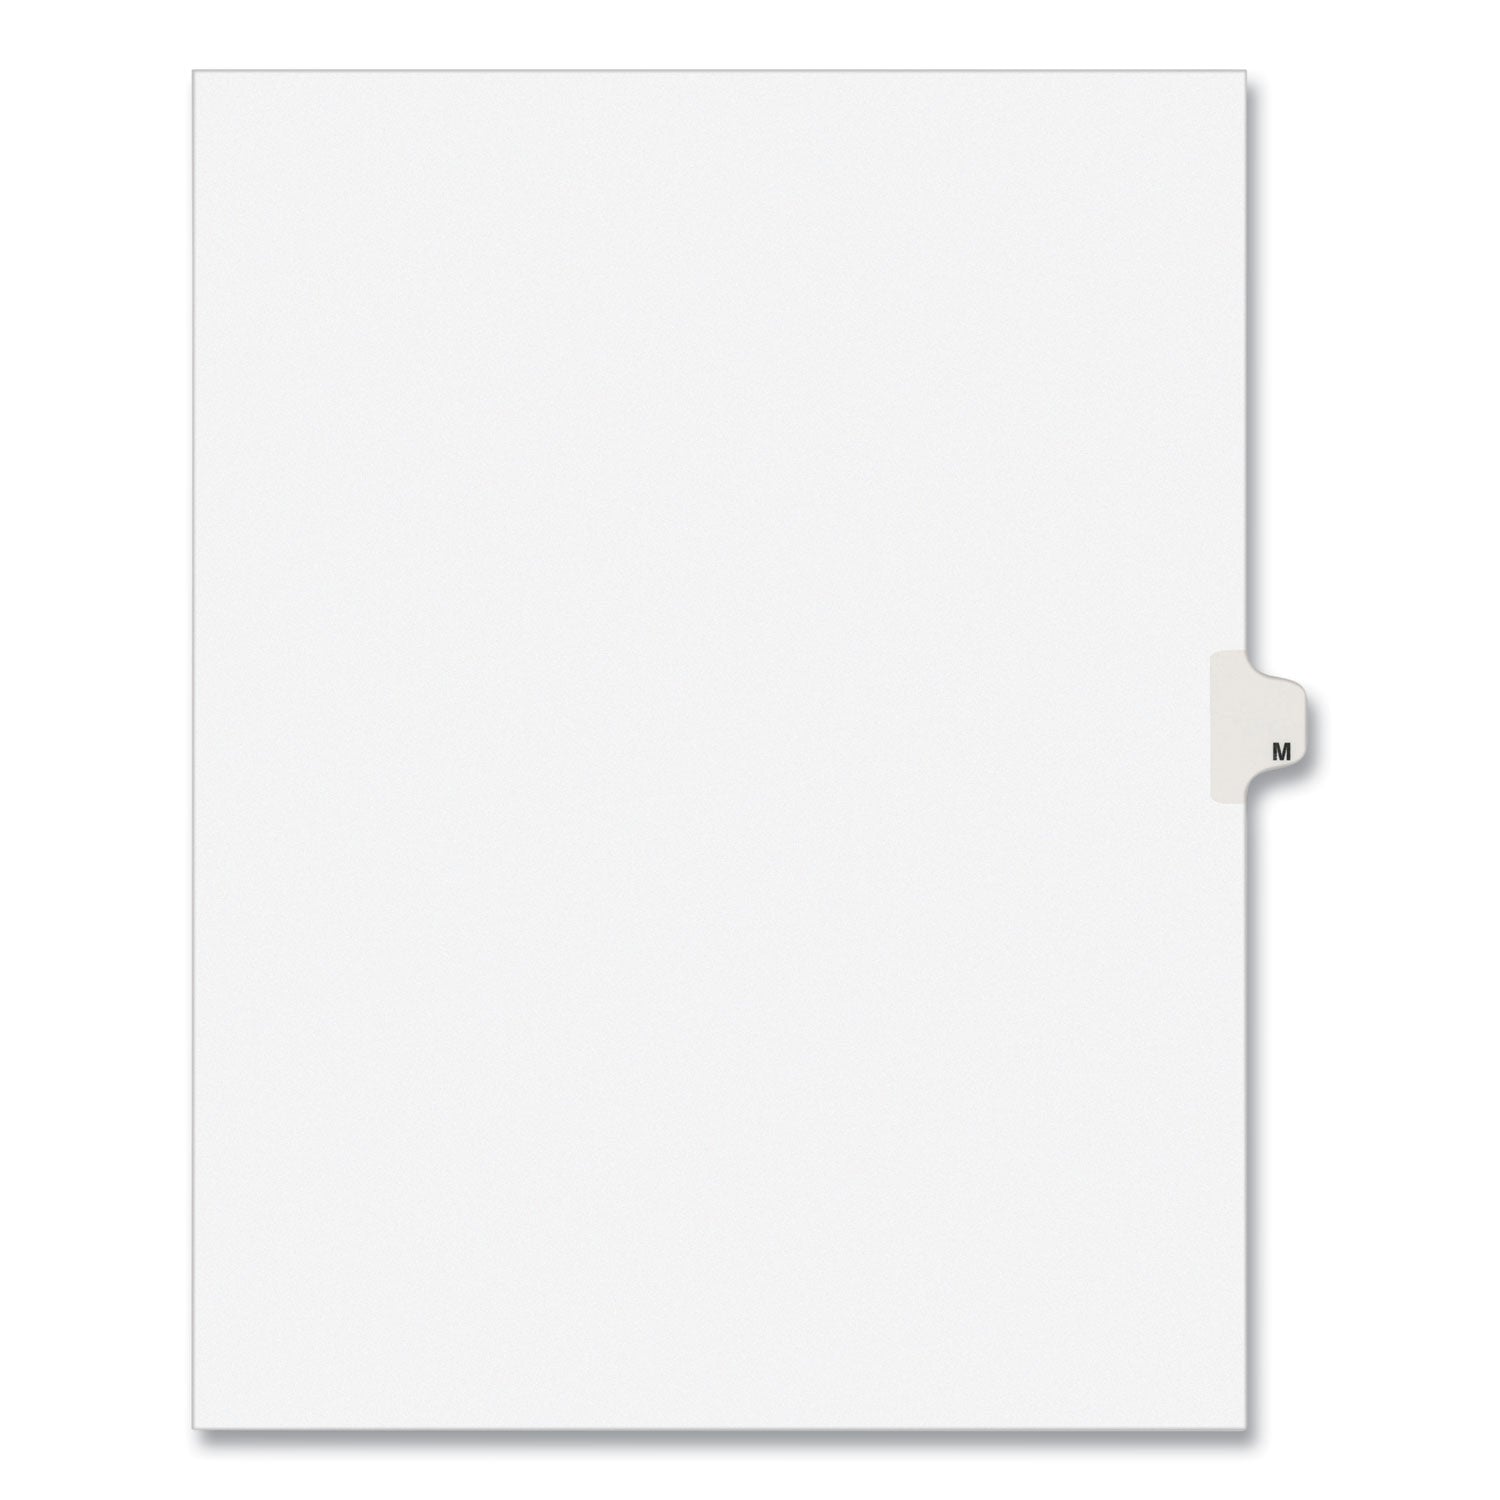 Preprinted Legal Exhibit Side Tab Index Dividers, Avery Style, 26-Tab, M, 11 x 8.5, White, 25/Pack, (1413) - 